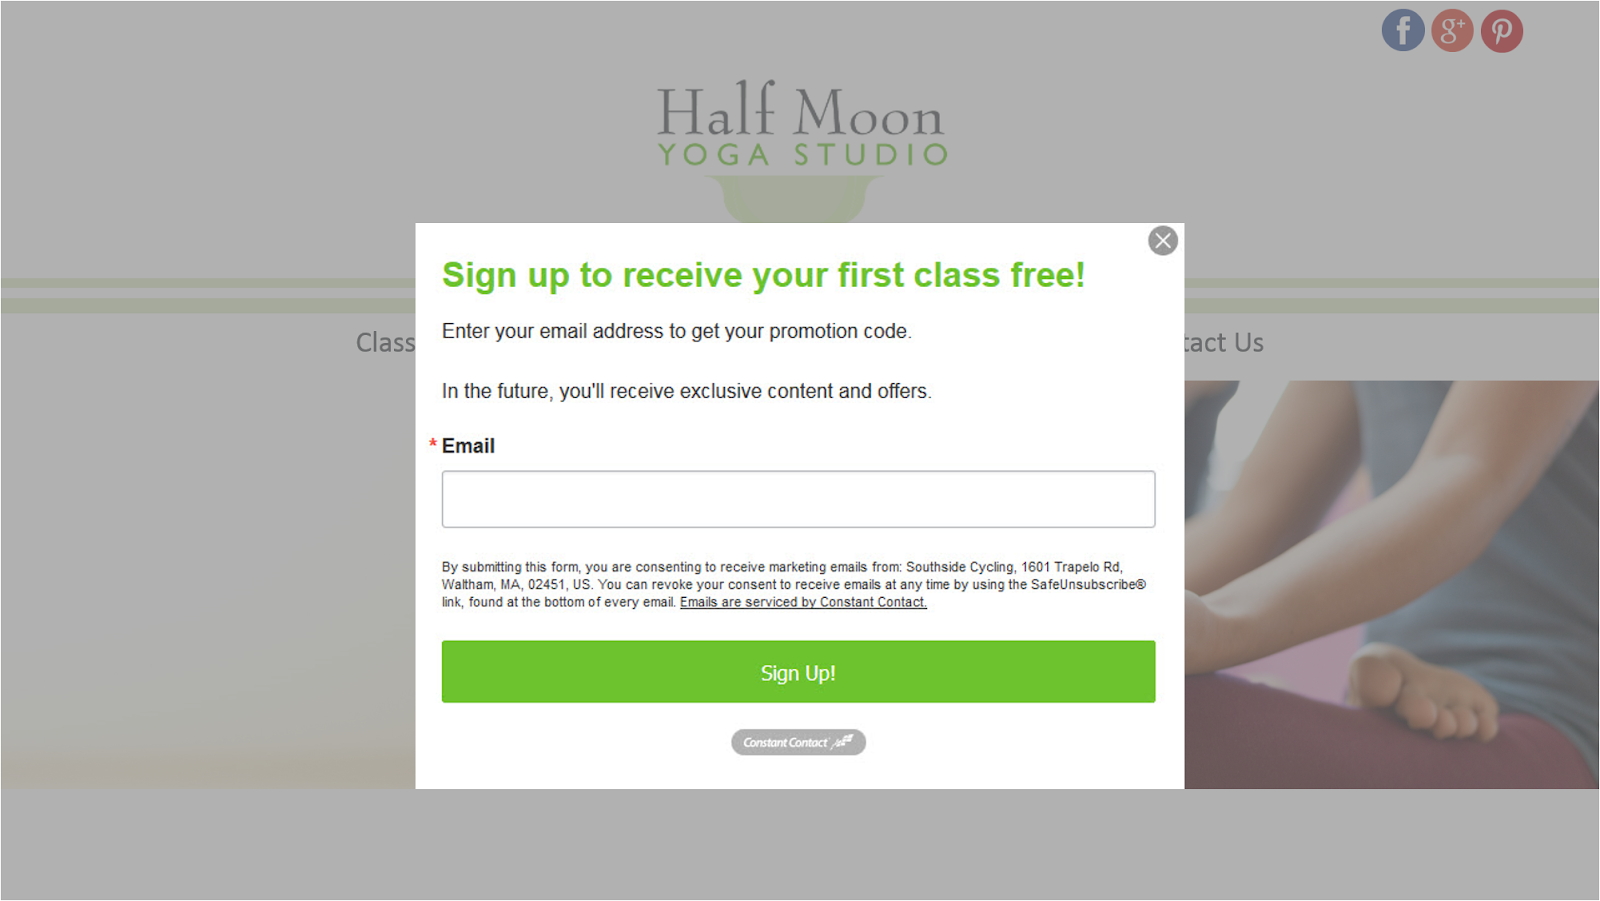 following email marketing best practices means always getting permission by using signup forms like this one